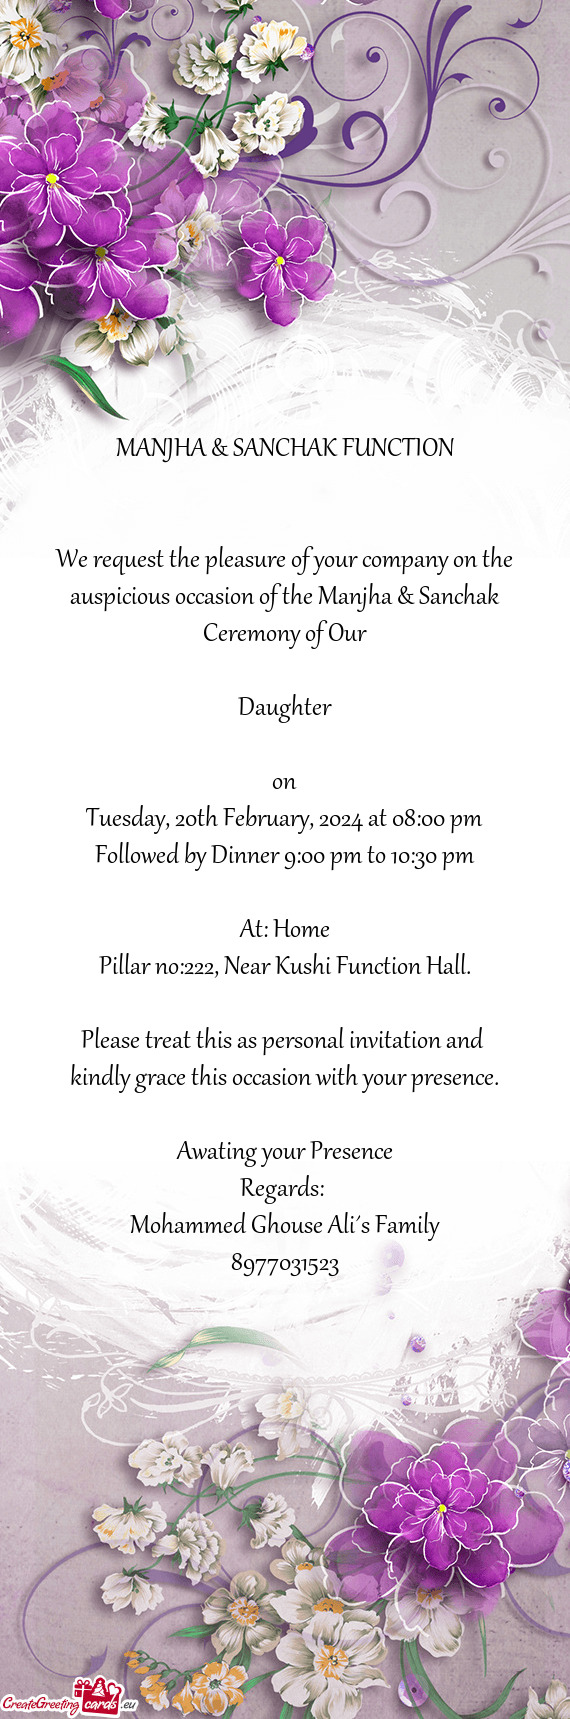 We request the pleasure of your company on the auspicious occasion of the Manjha & Sanchak Ceremony